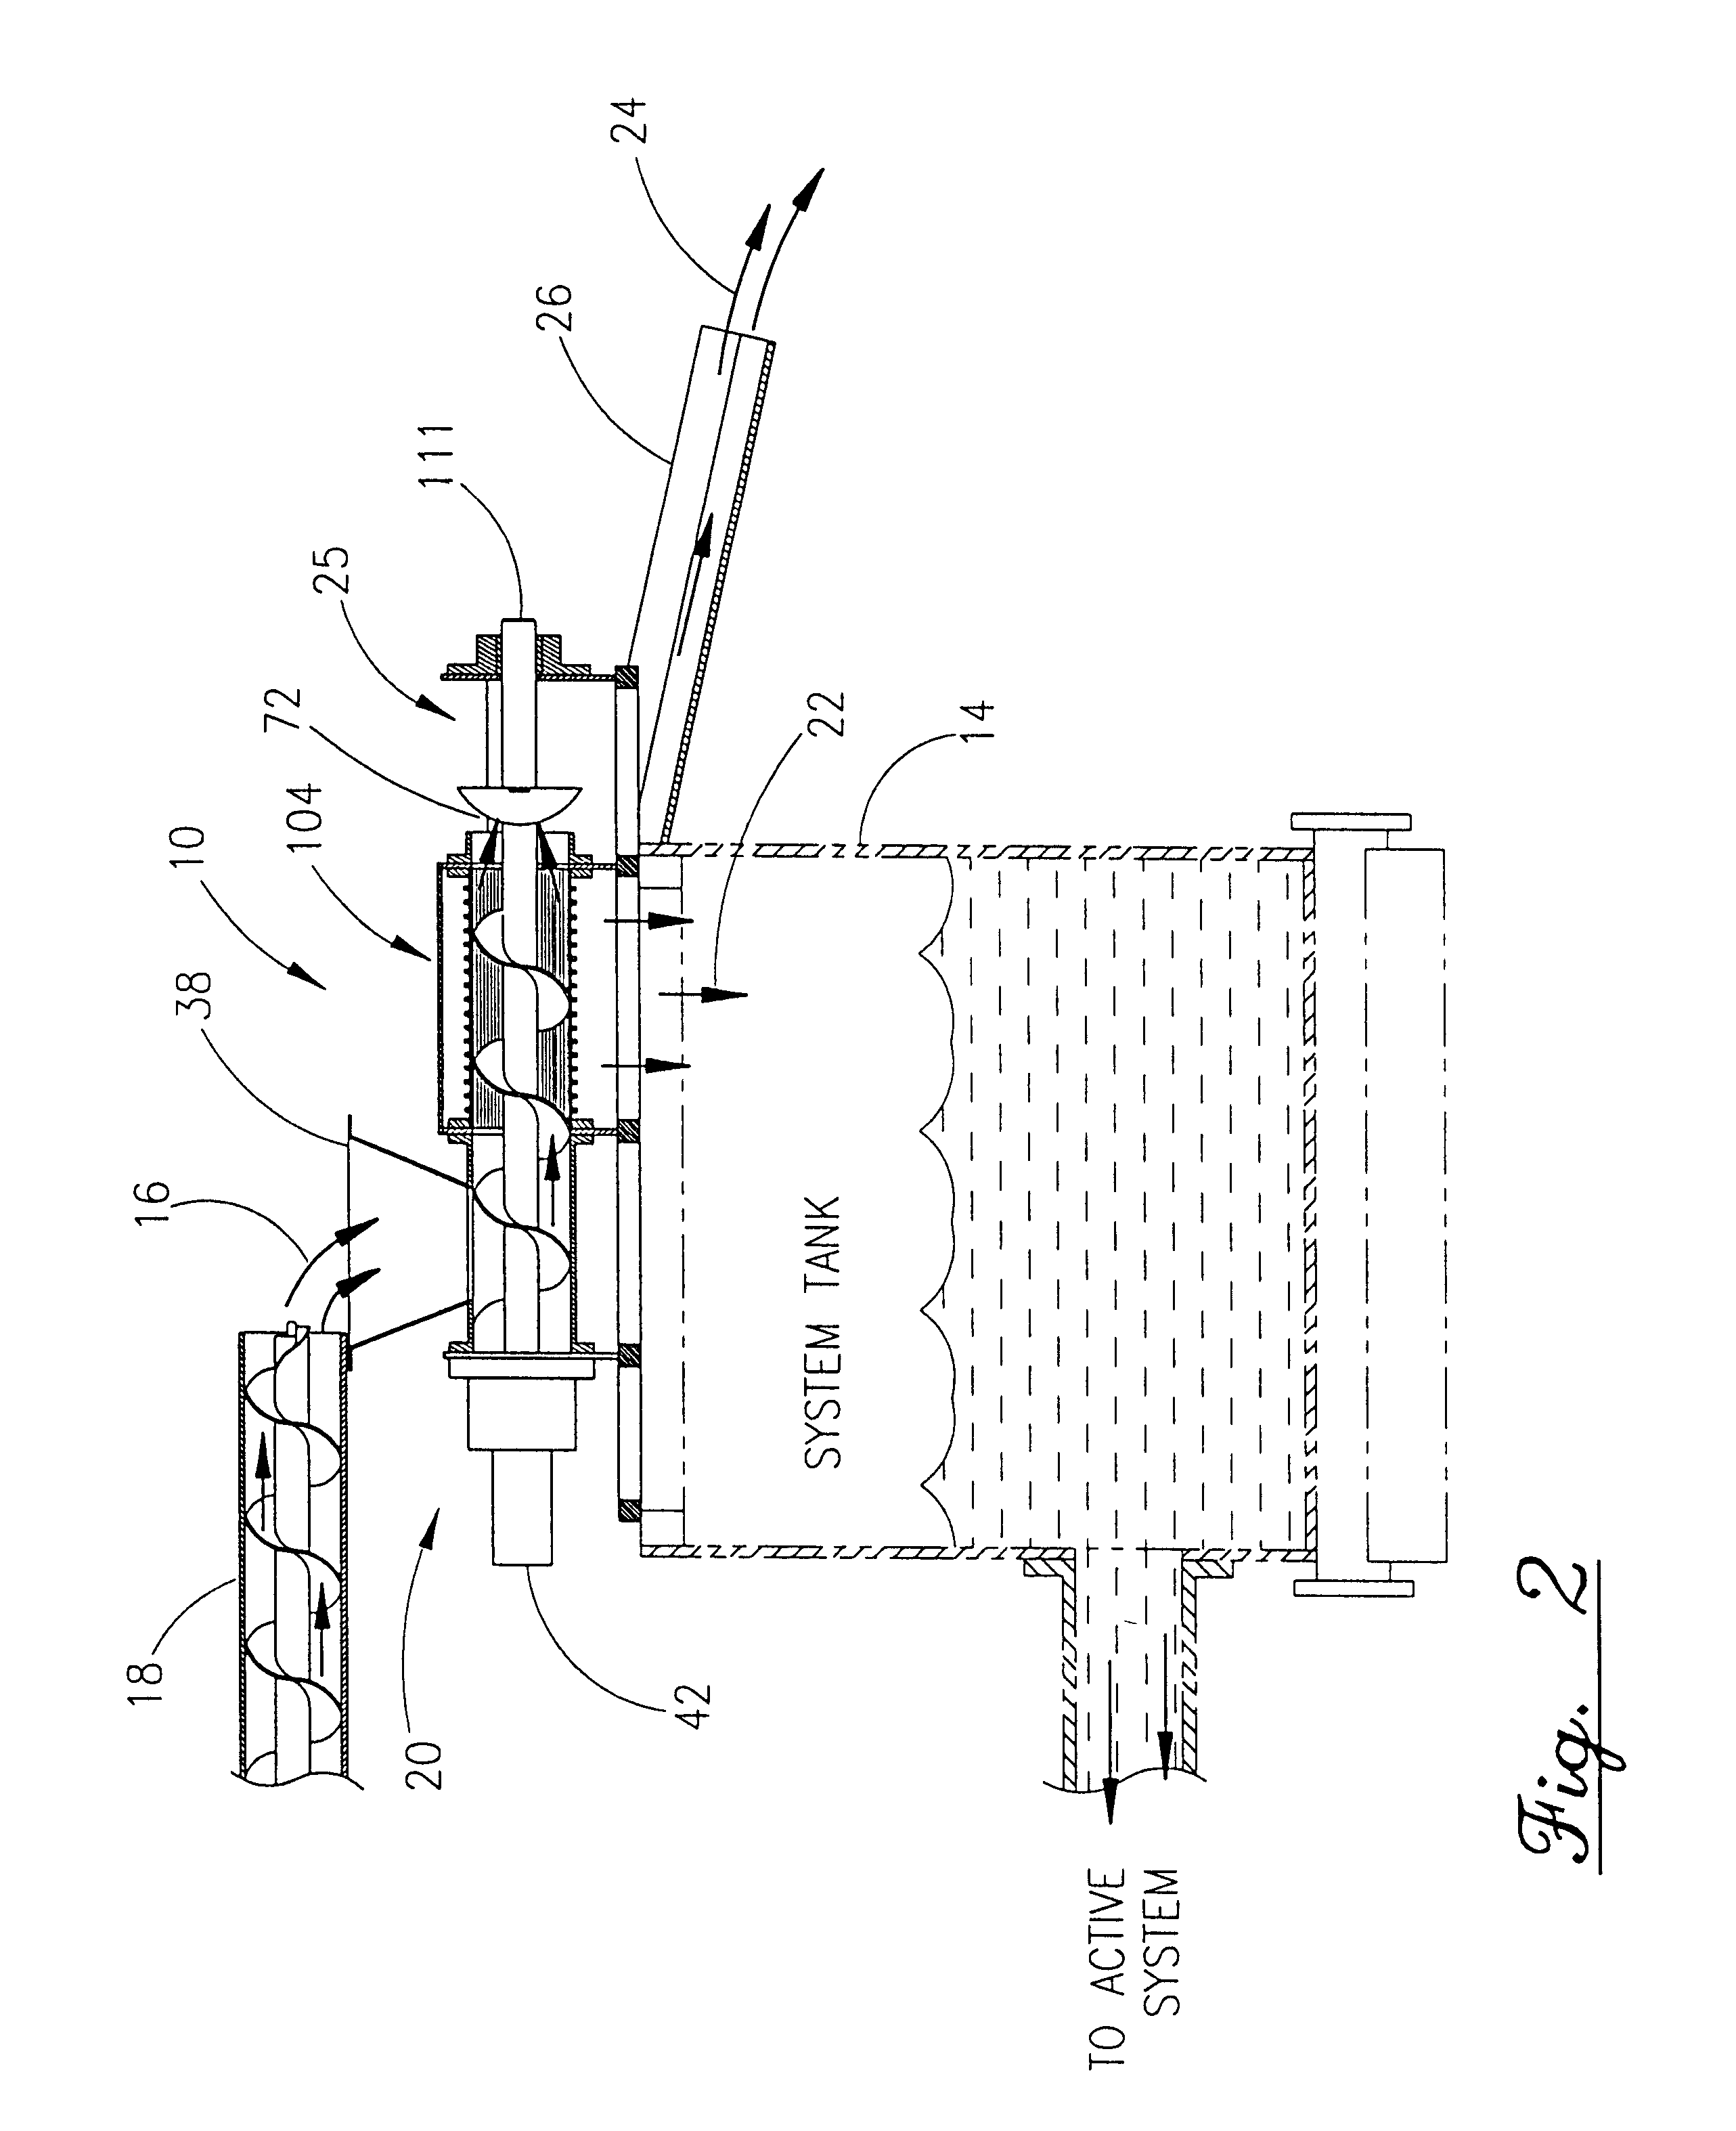 Drilling fluid recovery and cuttings processing system